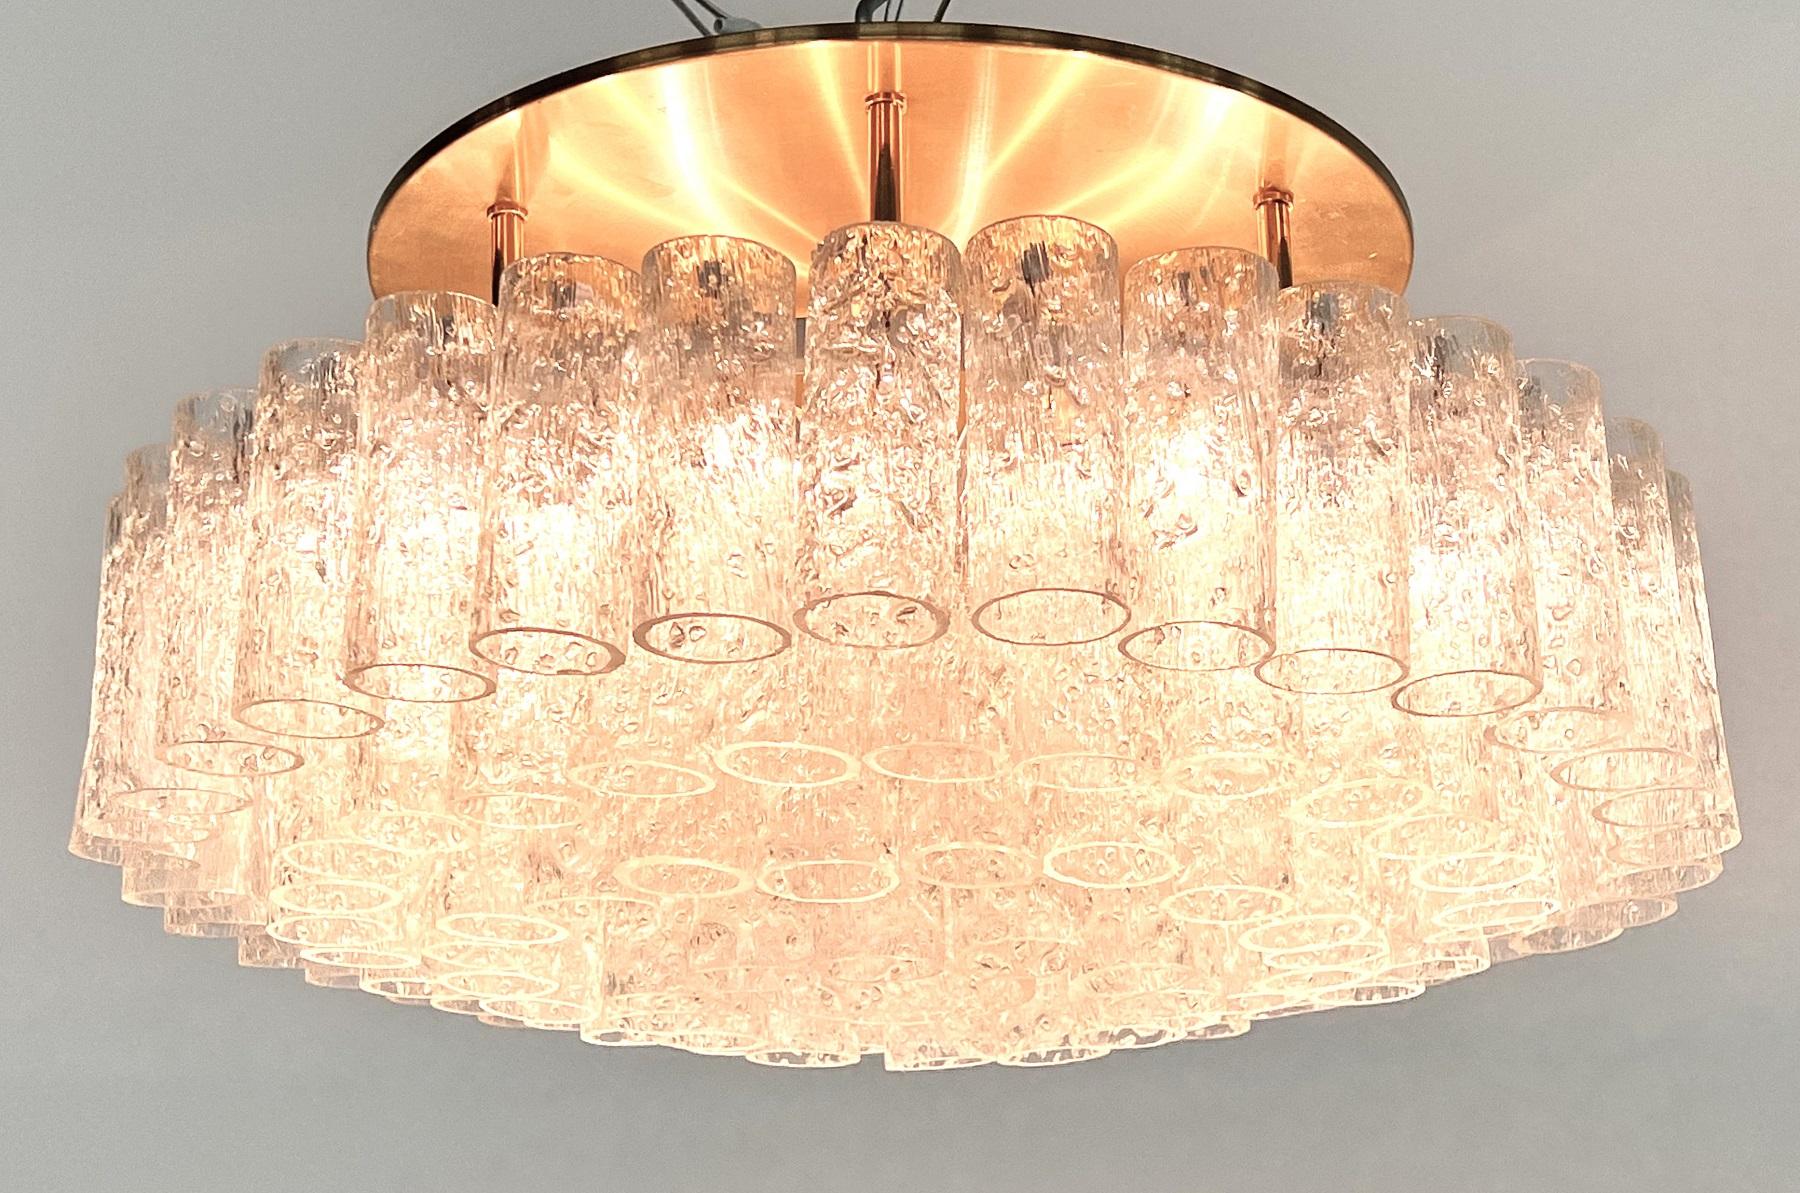 Gorgeous big chandelier or flush mount light with brass ceiling plate and 5 levels of 97 ice glasses, all in very good condition.
Made in Germany in the 1970s by DORIA.
The ceiling plate is equipped with 9 bulb holders for small candelabra bulbs and